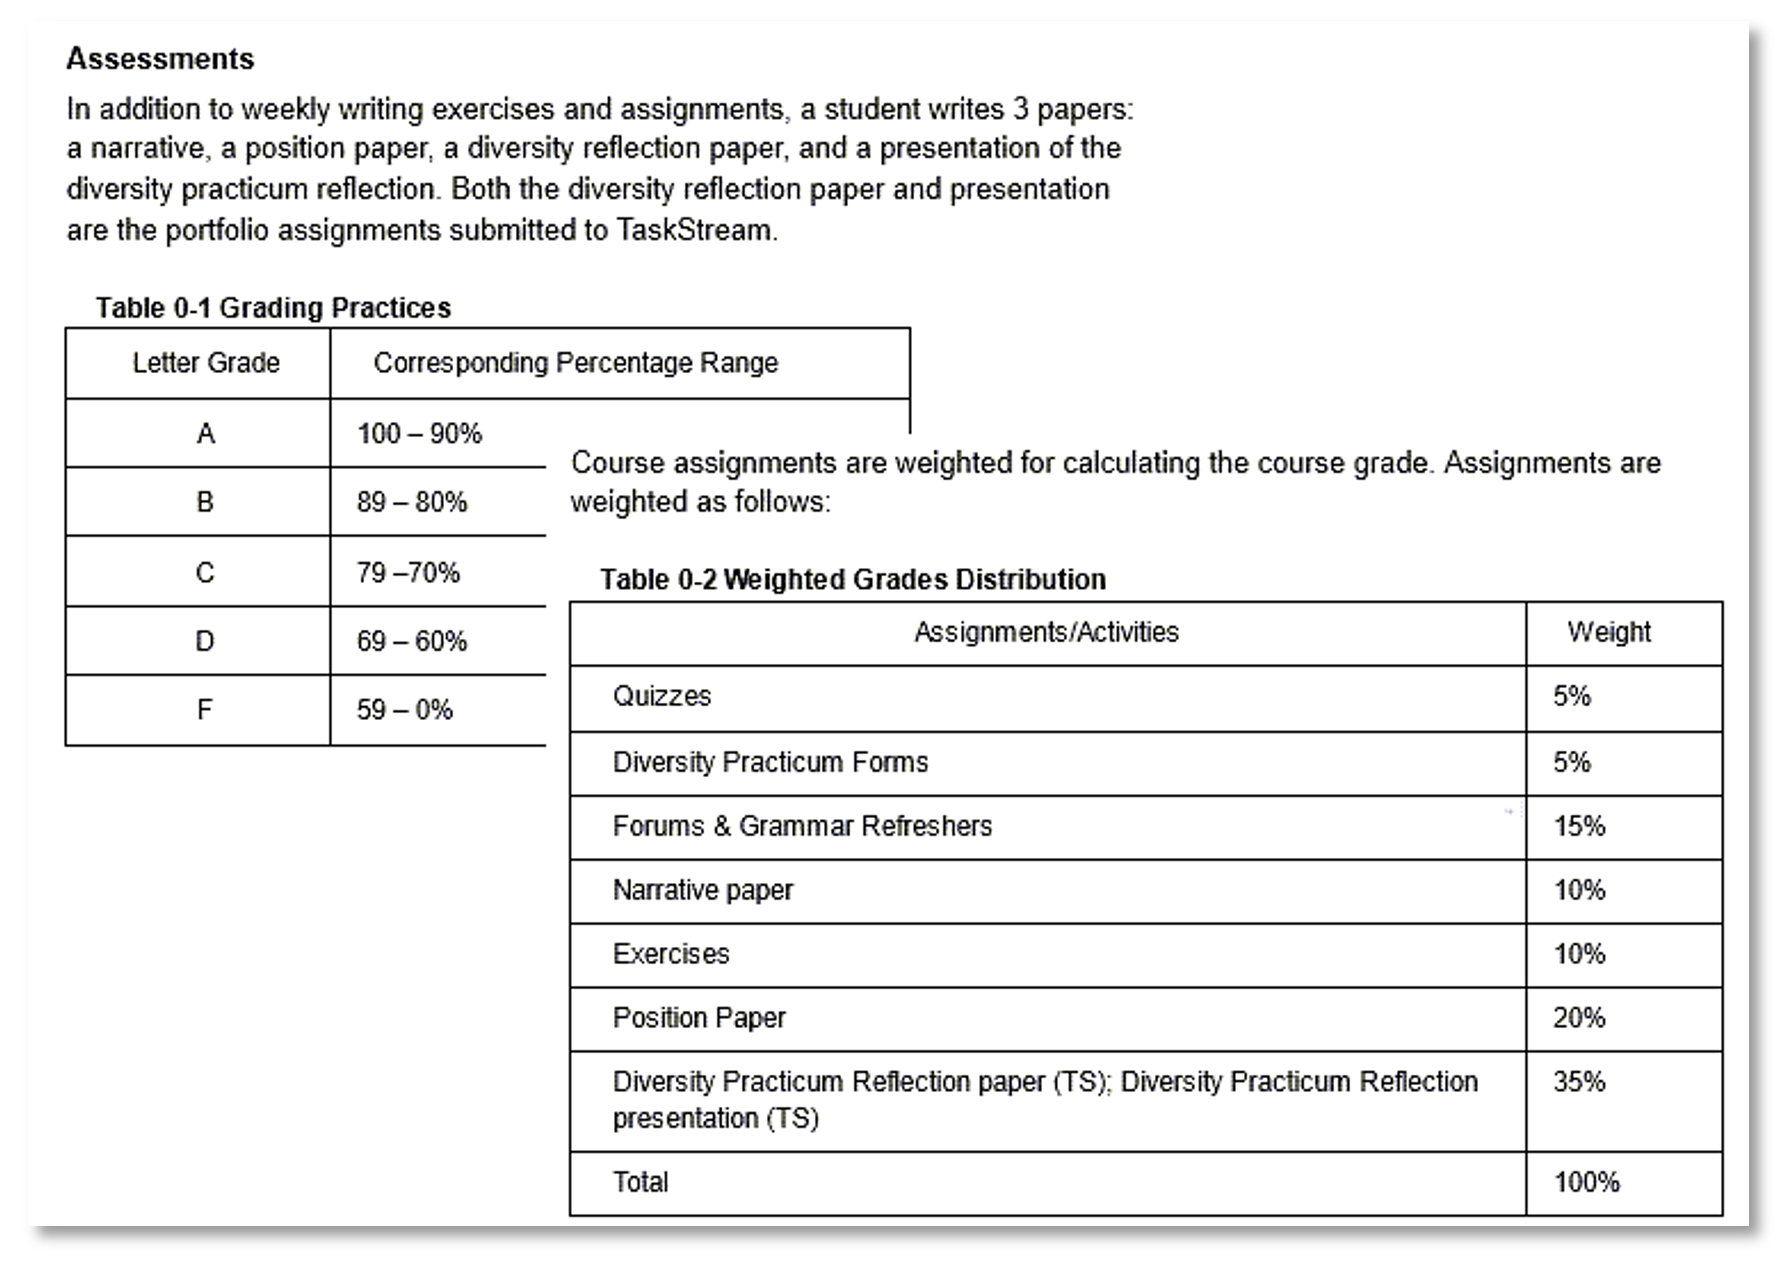 Grading Scales are provided at the institutional and course level